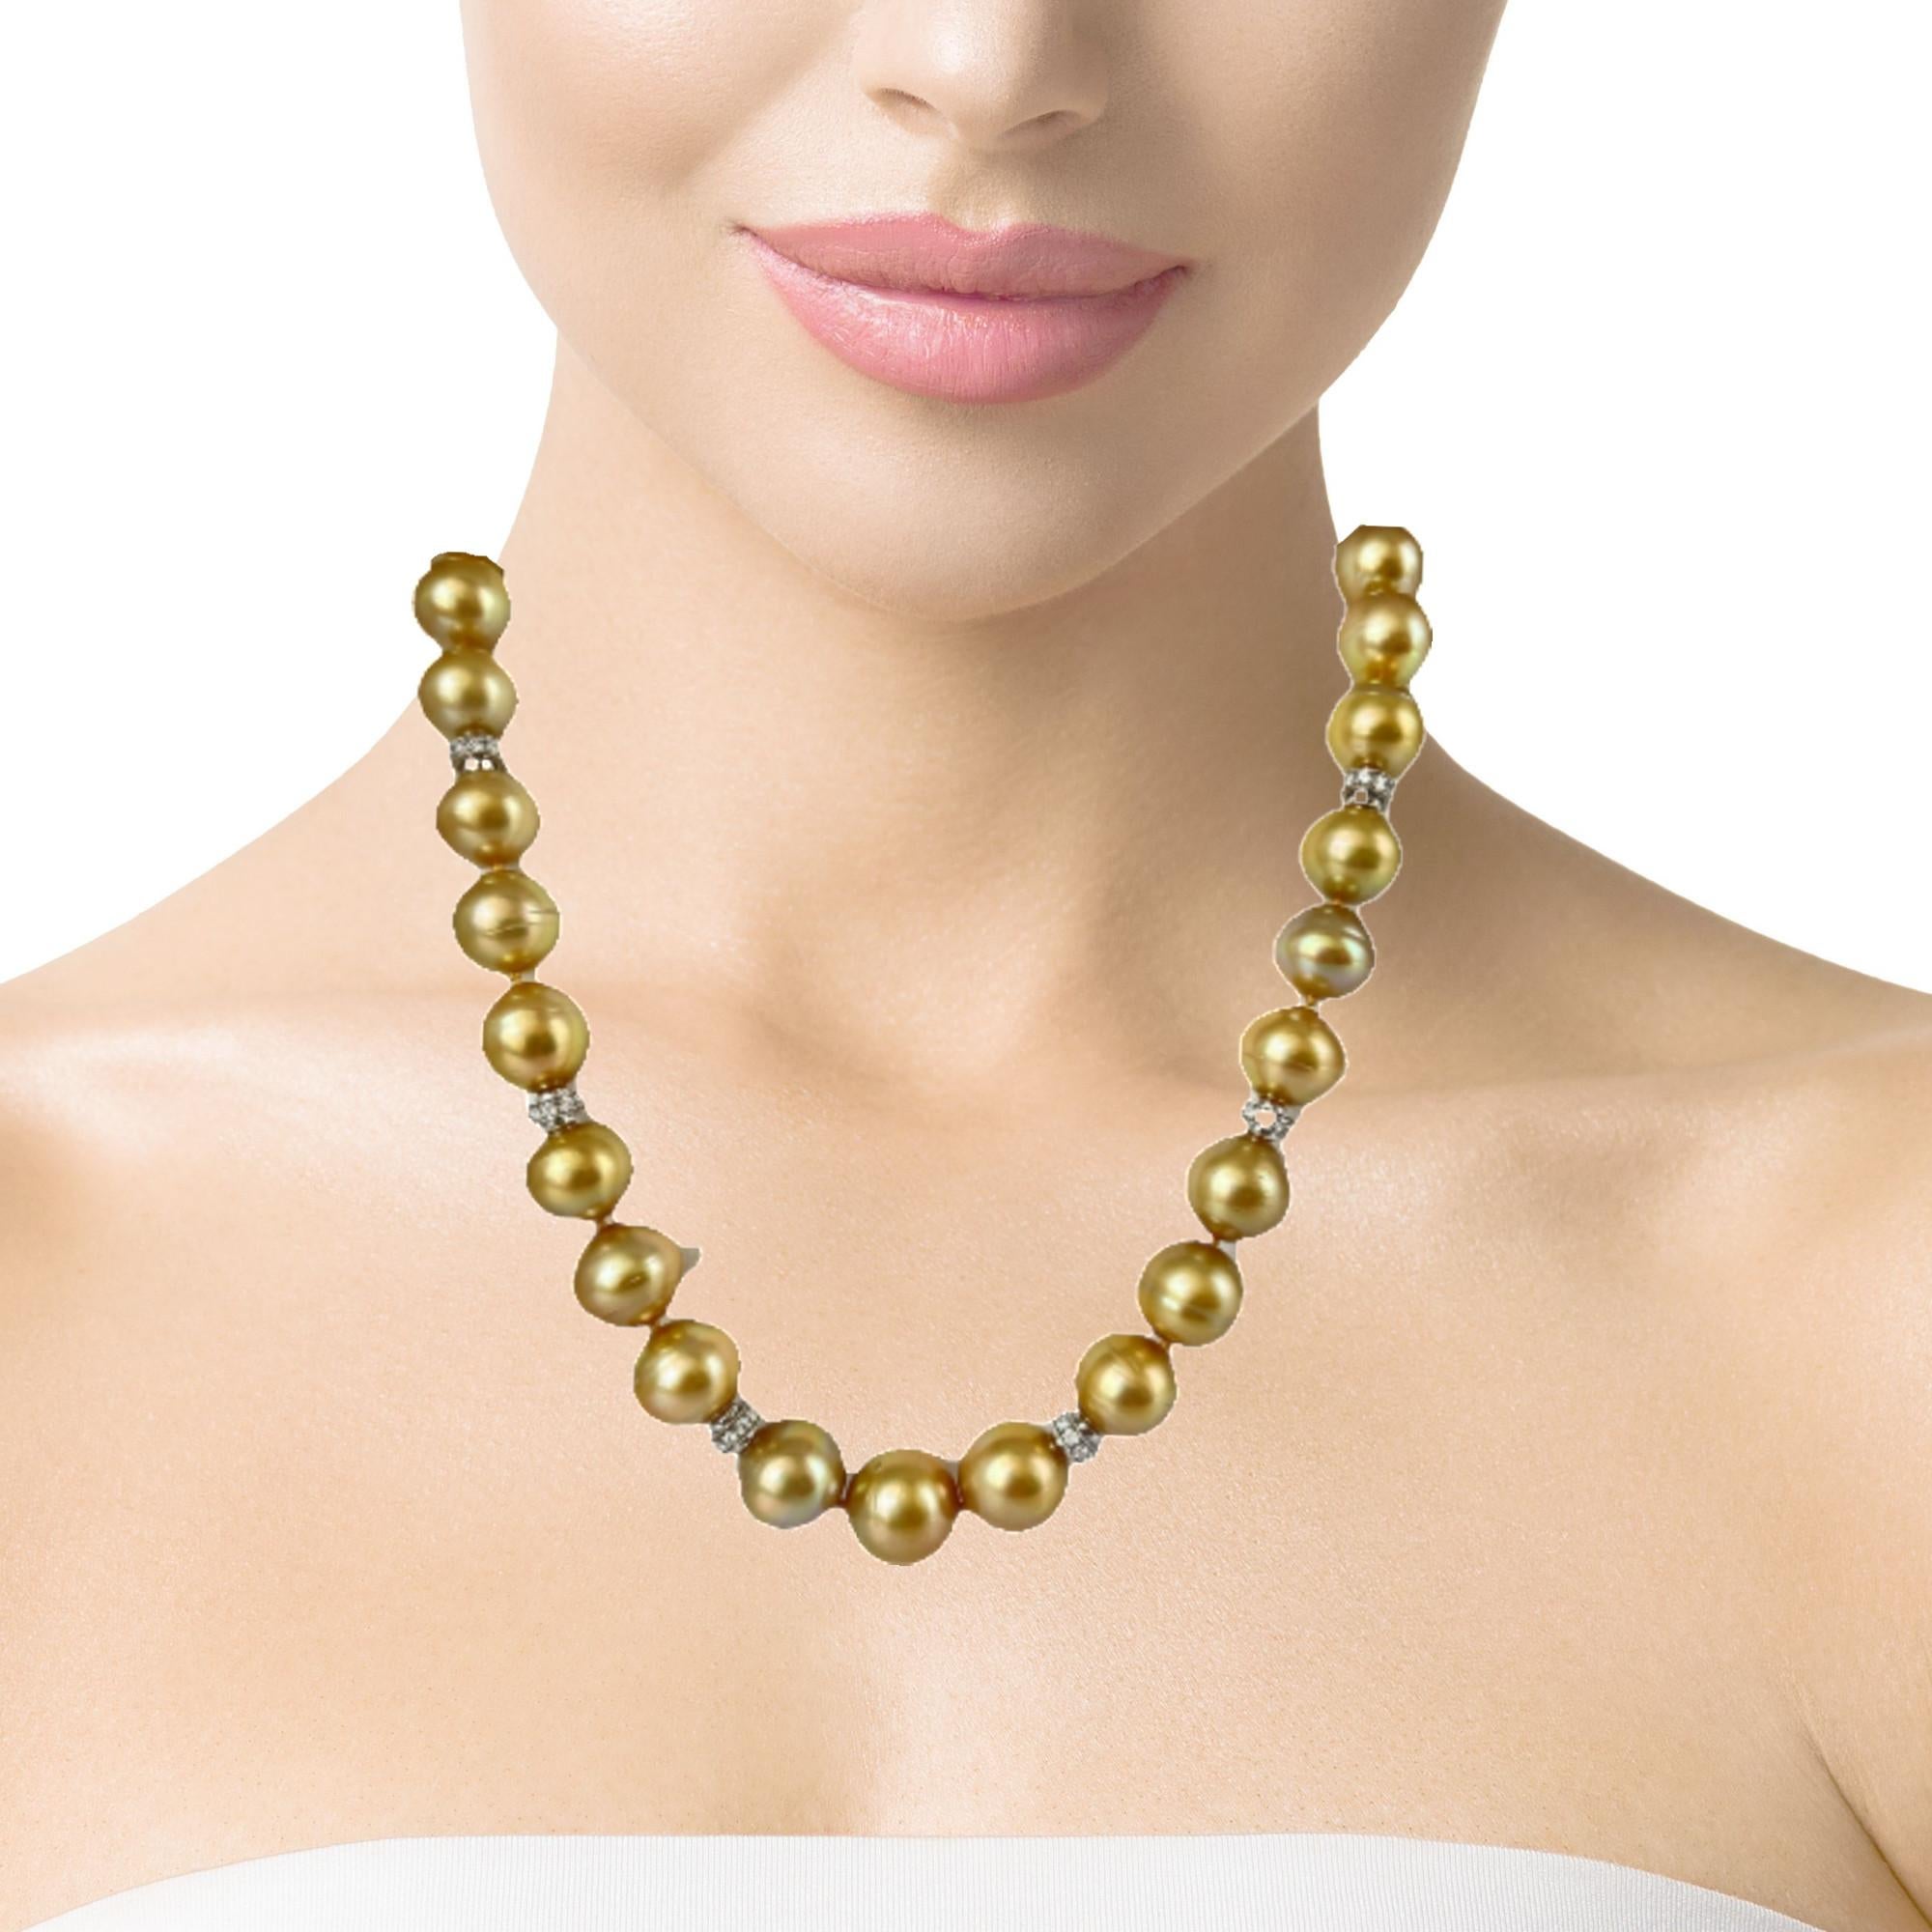 Golden South Seas Pearl Necklace with Diamond and Gold Accents, 21 Inches In New Condition For Sale In Los Angeles, CA